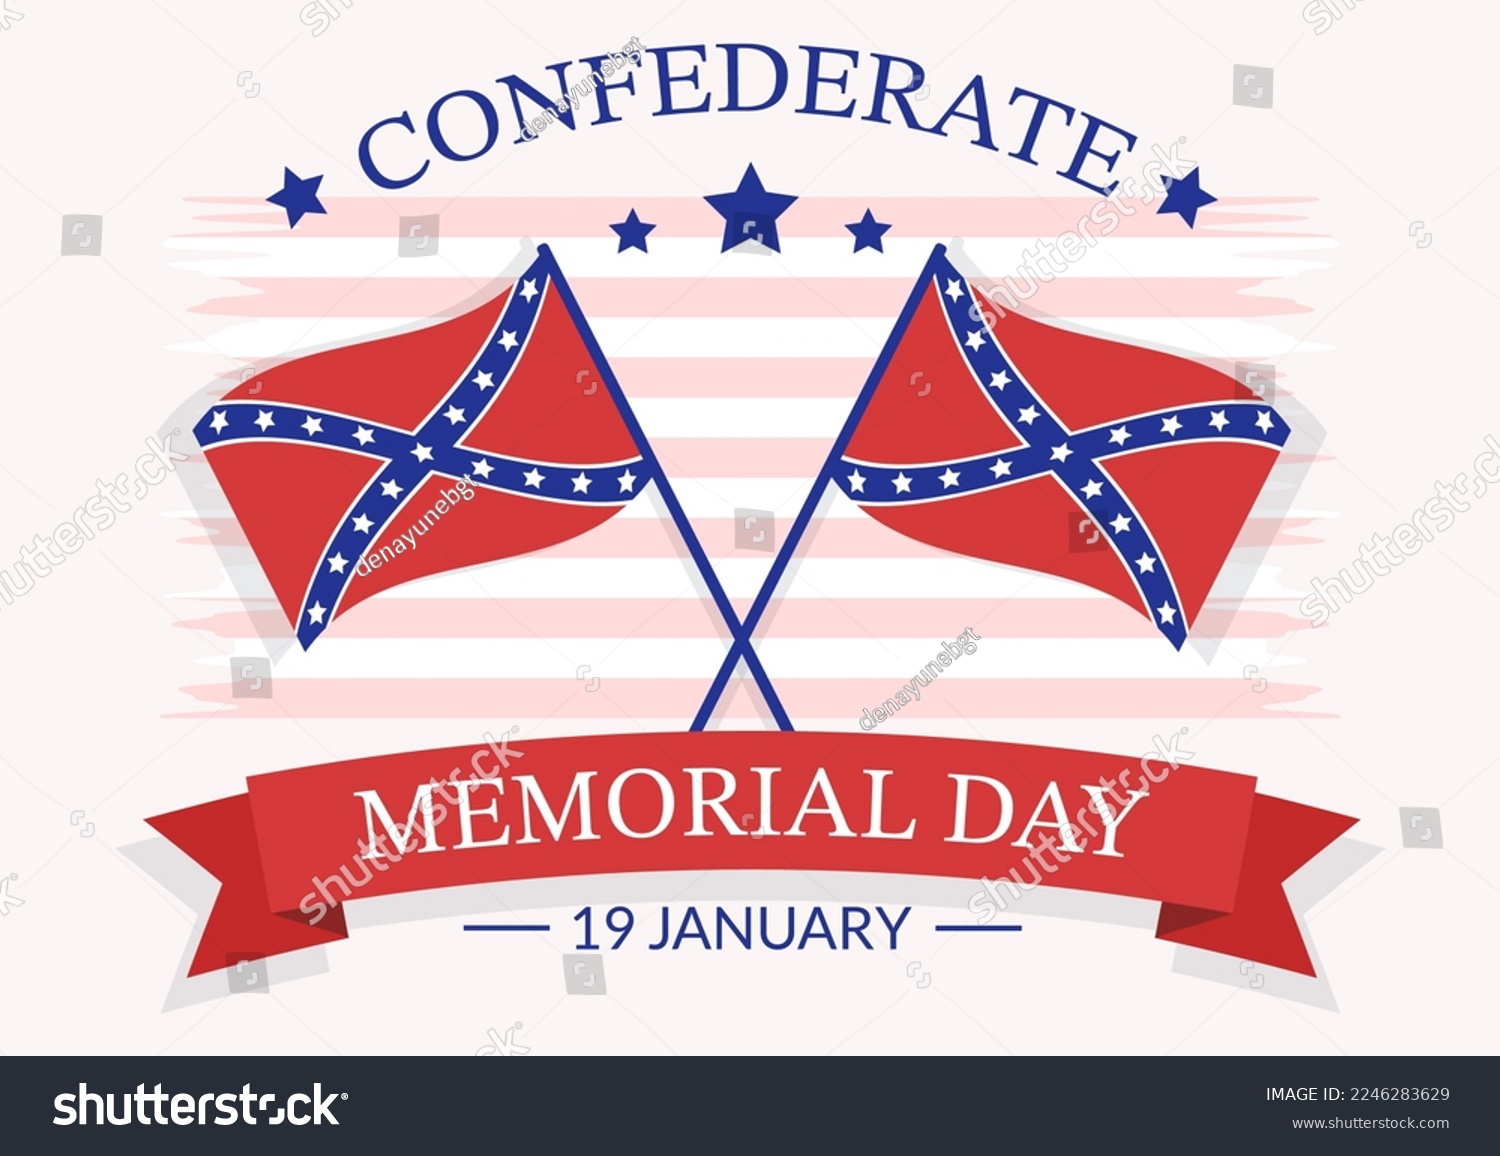 SVG of Confederate Memorial Day Illustration for Commemoration Servicemen of the America with Flag Flat Cartoon Template Hand Drawn Design svg